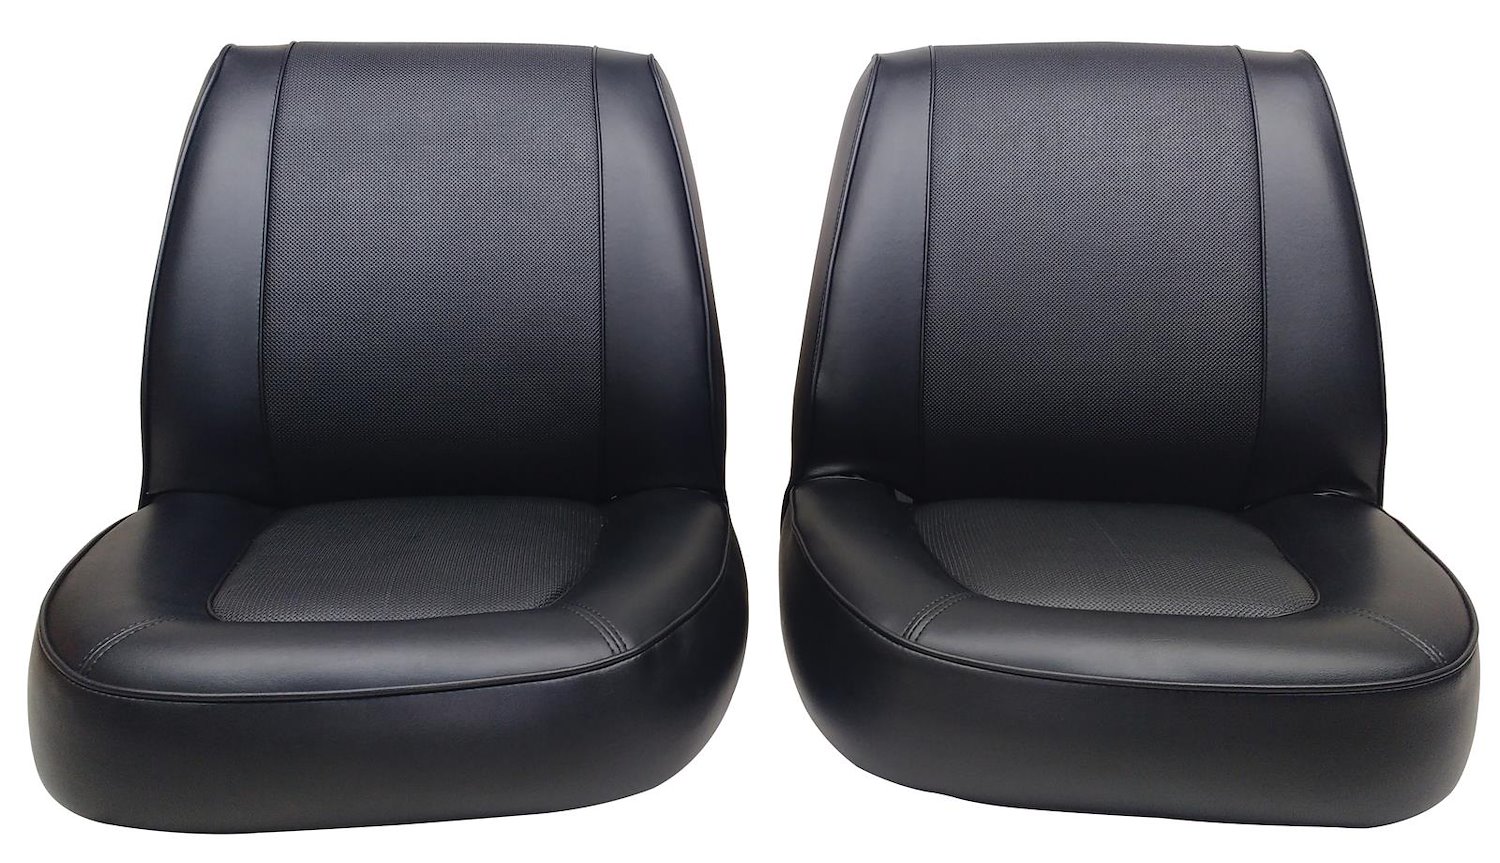 1969 Mercury Cougar Décor Interior Front Bucket Seat Upholstery Set